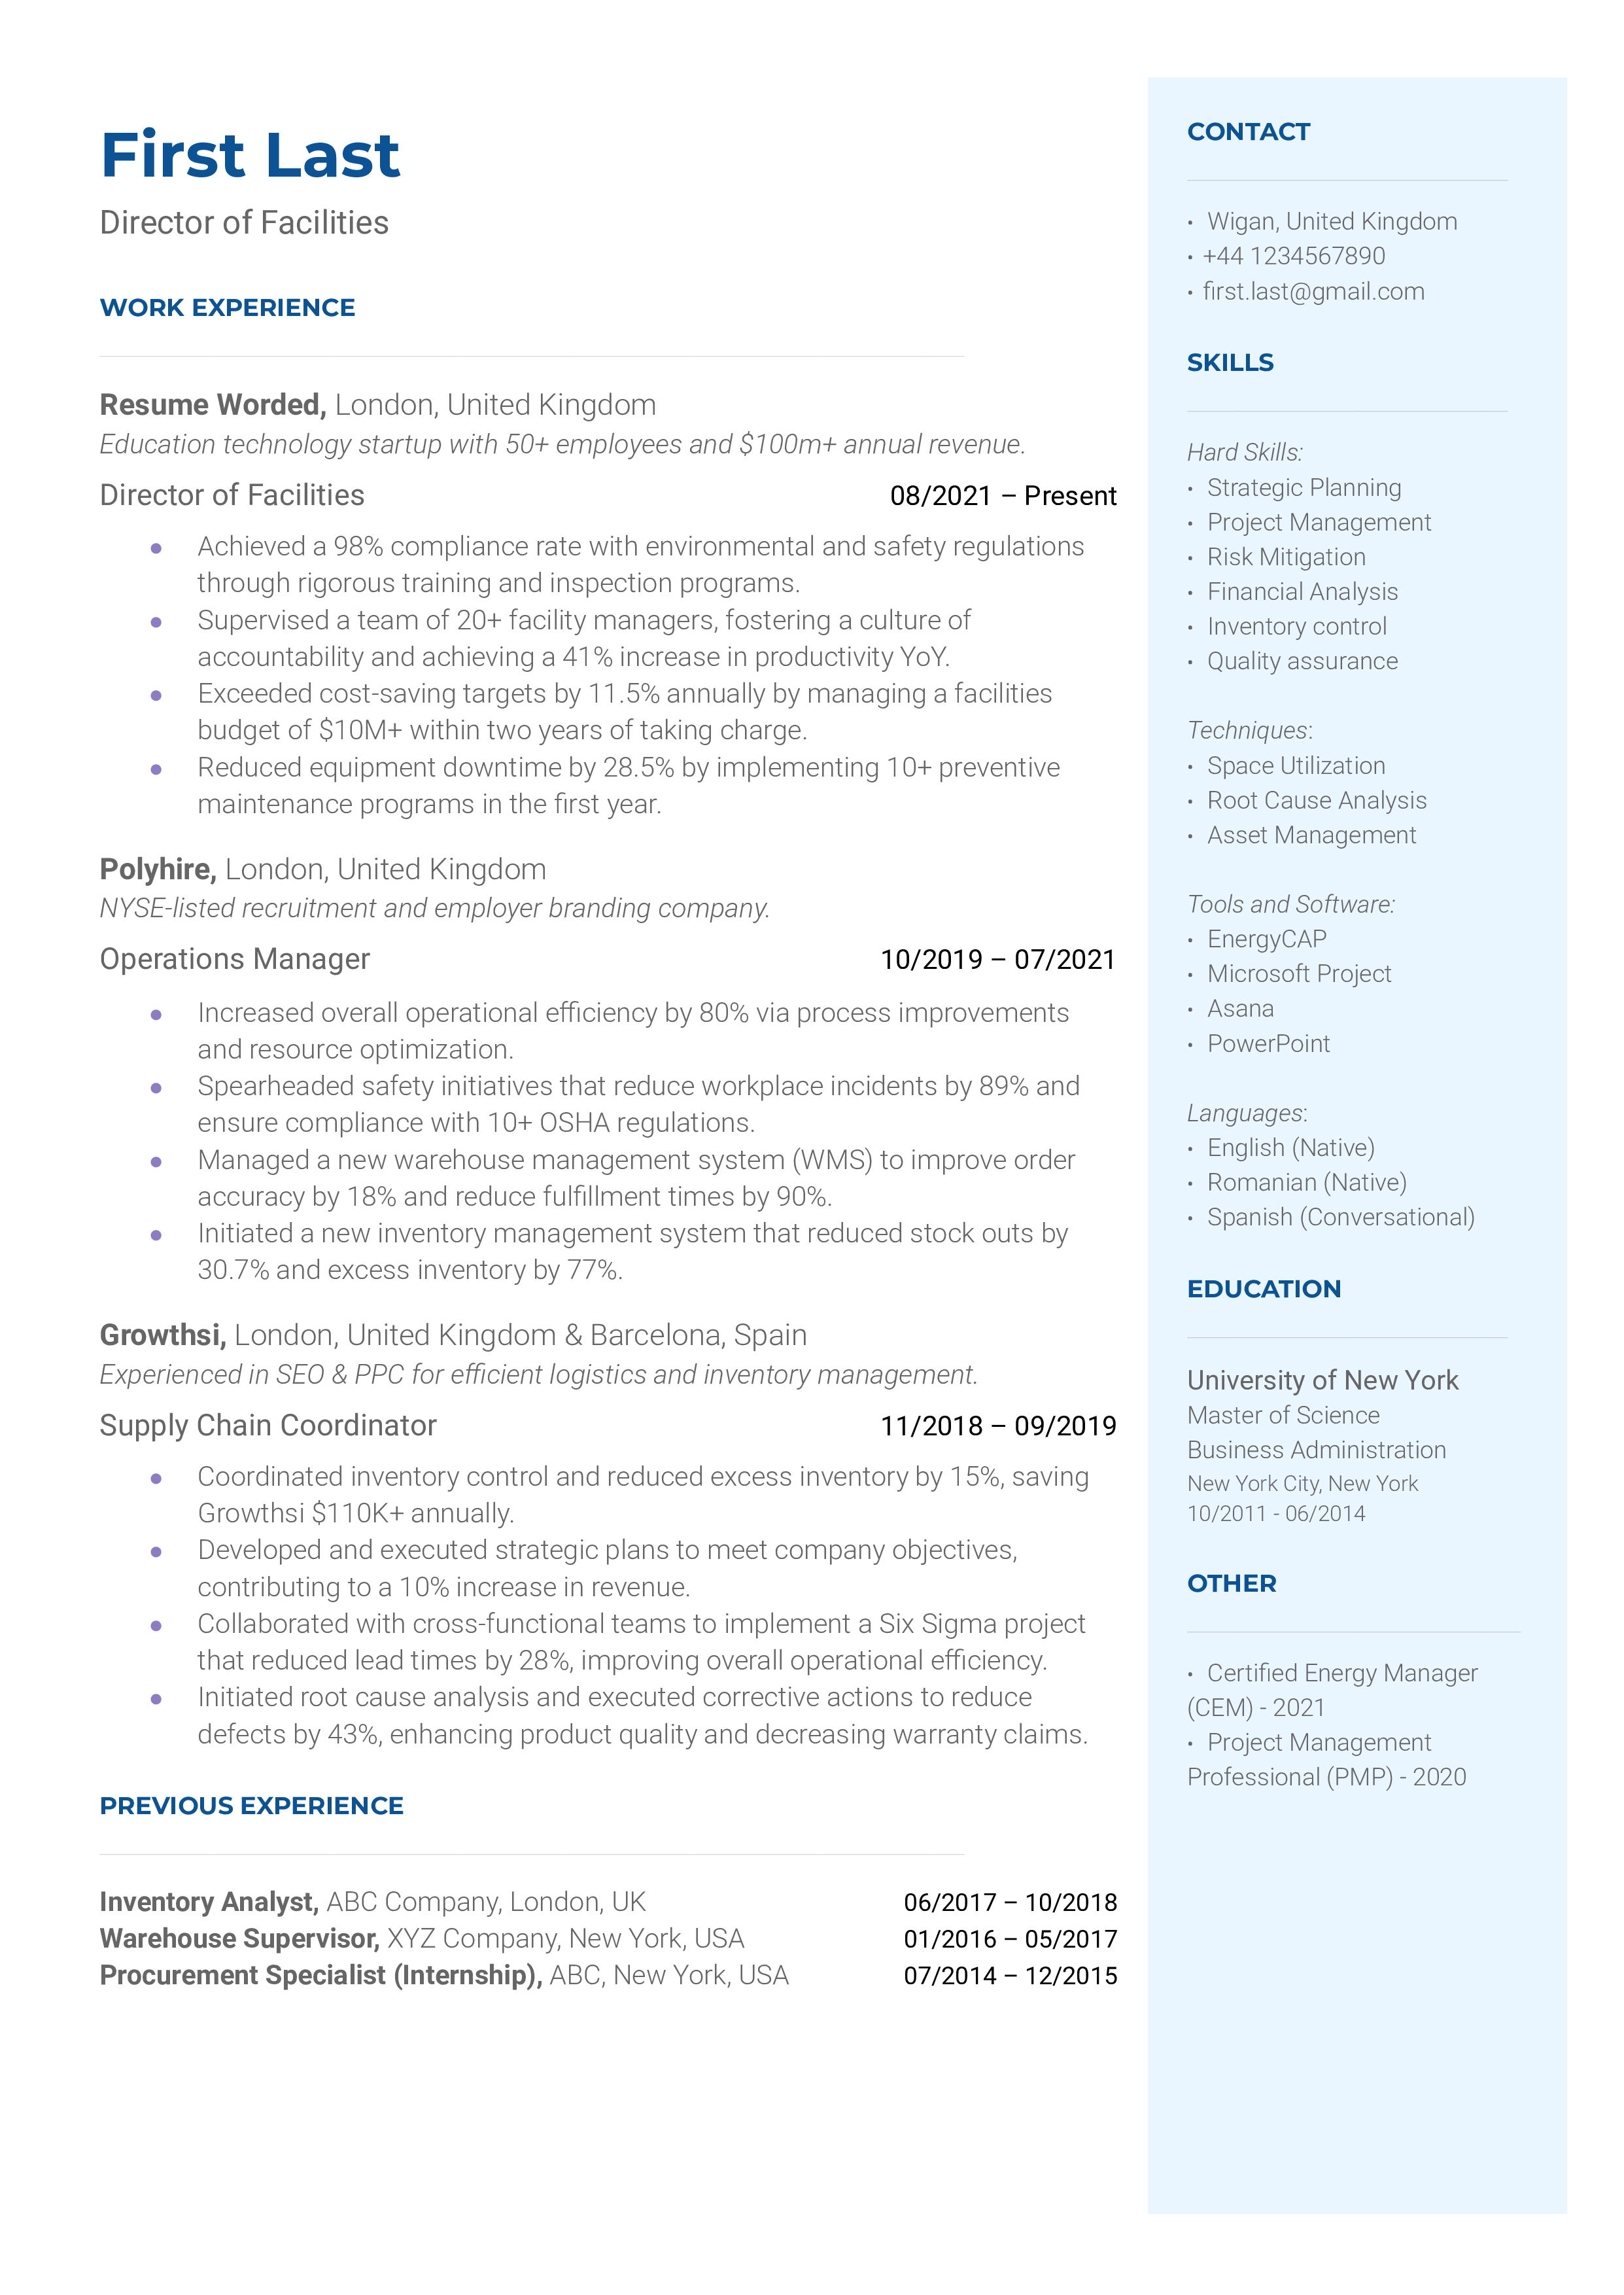 Snapshot of a resume for a Director of Facilities role.